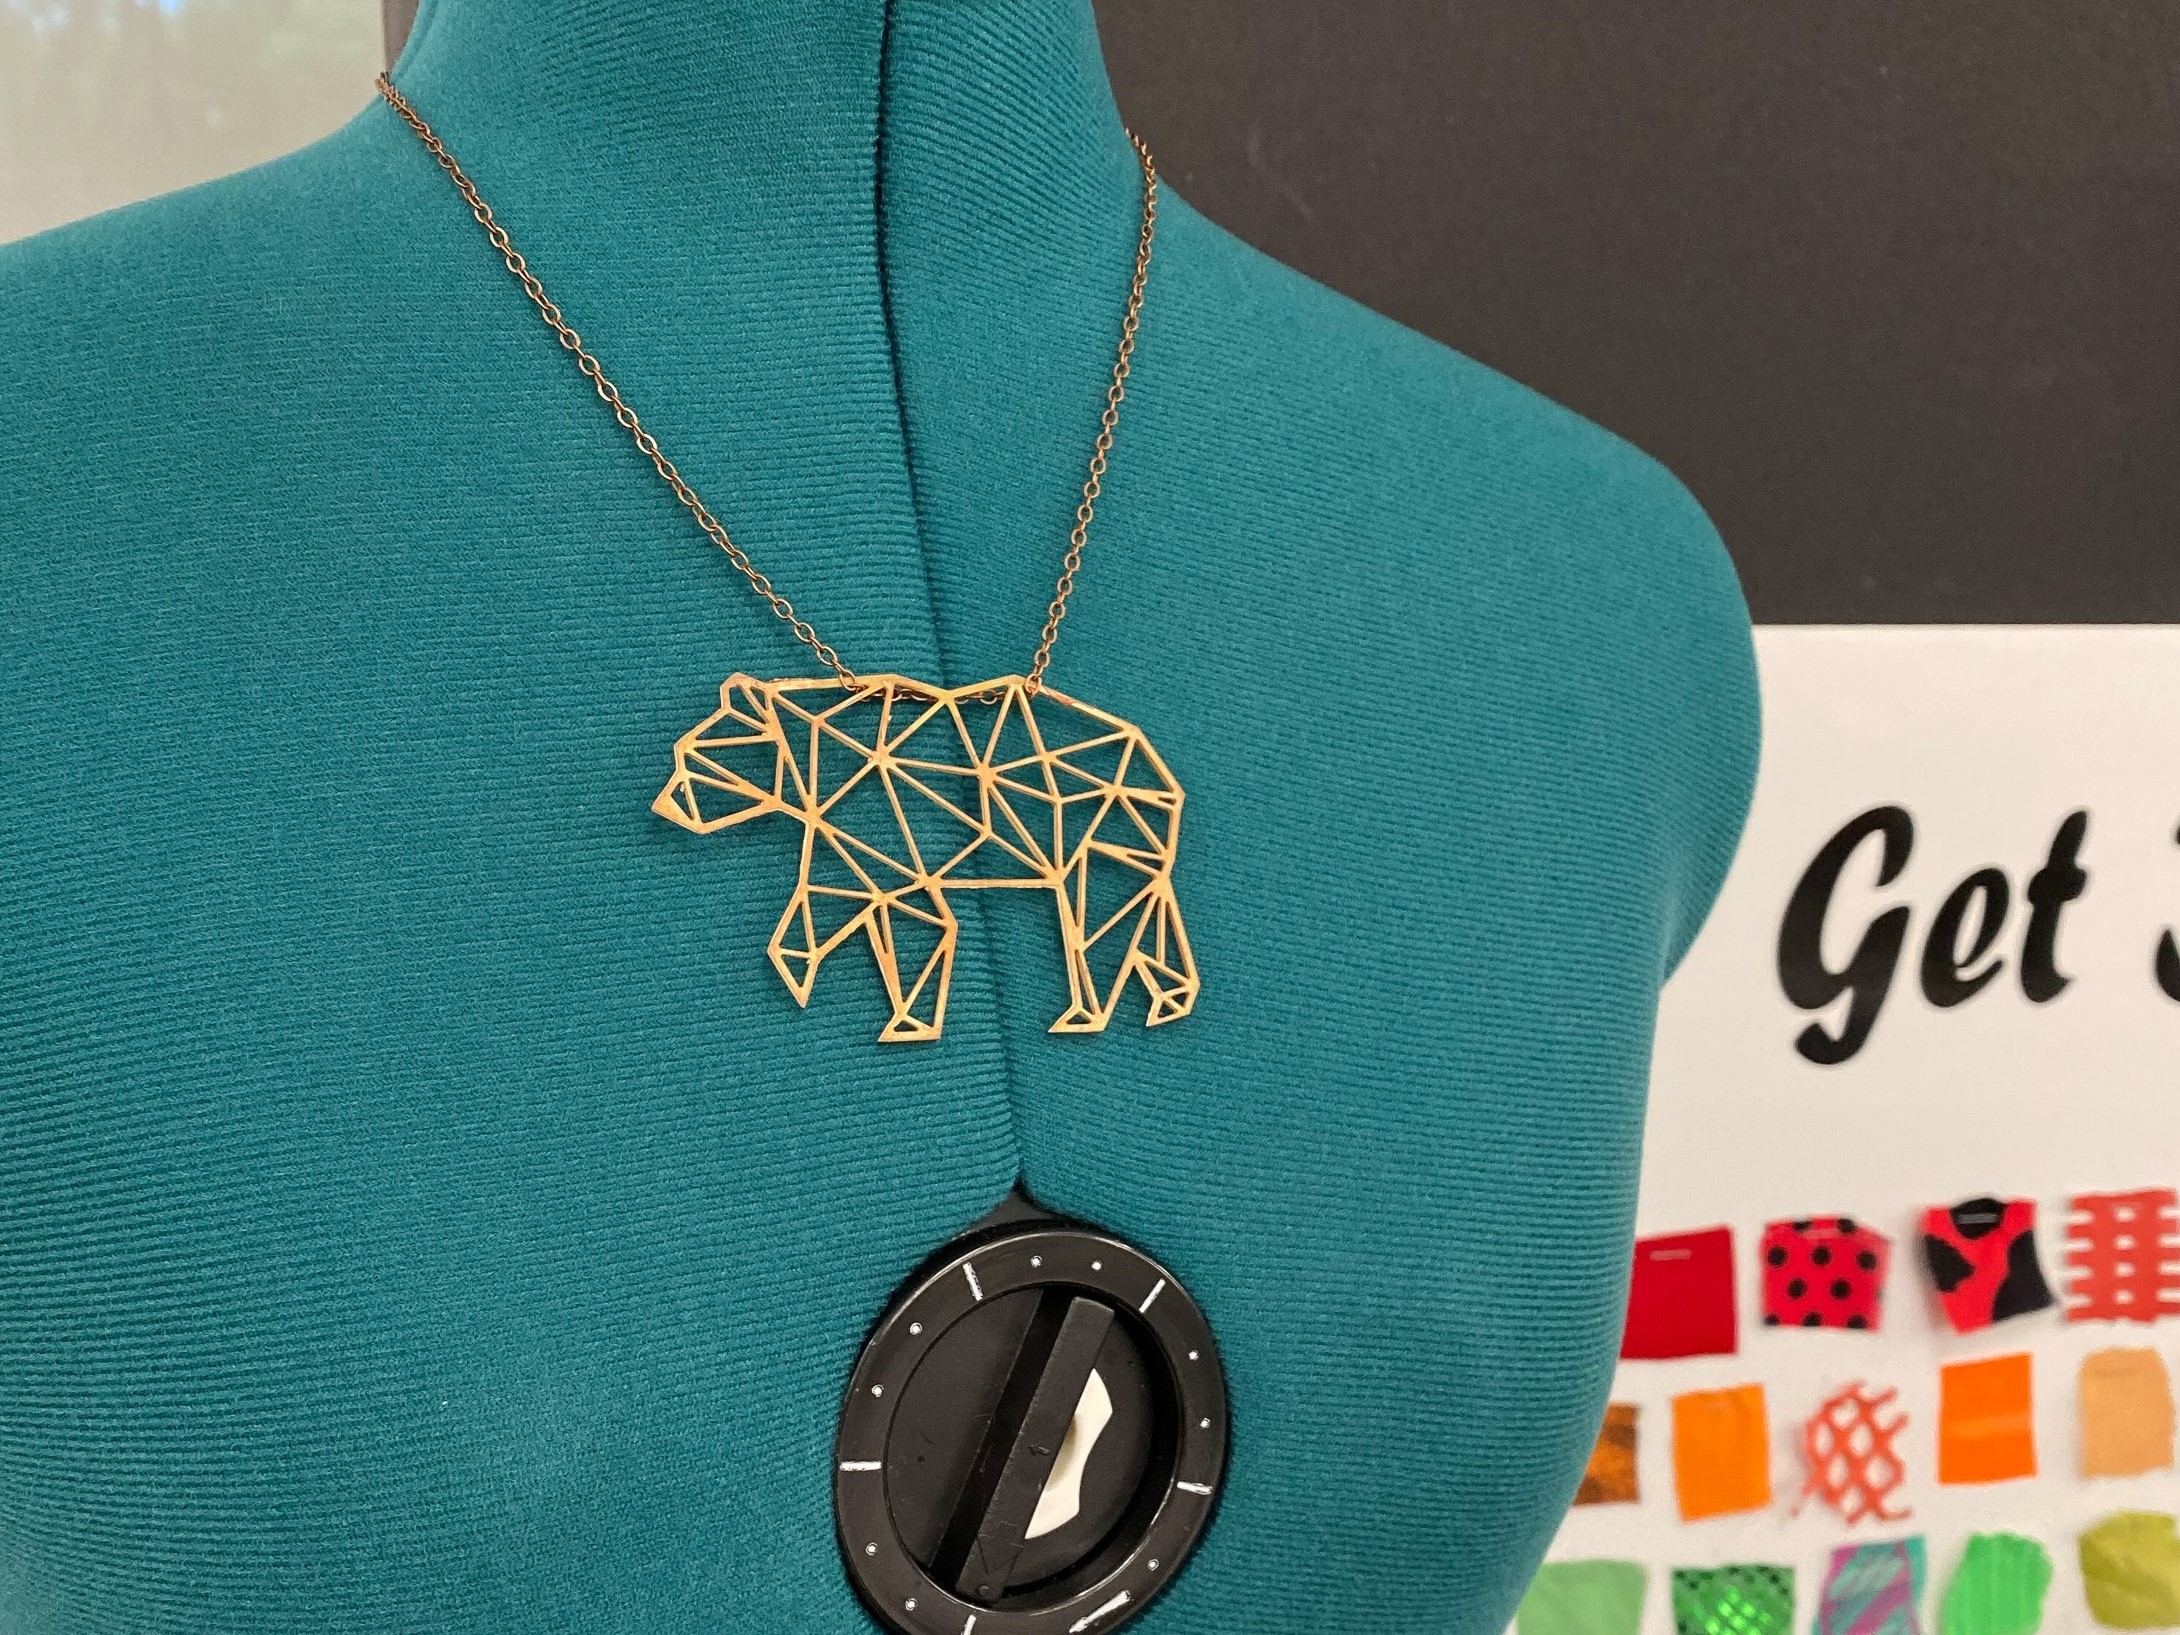 Necklace of a geometric bear